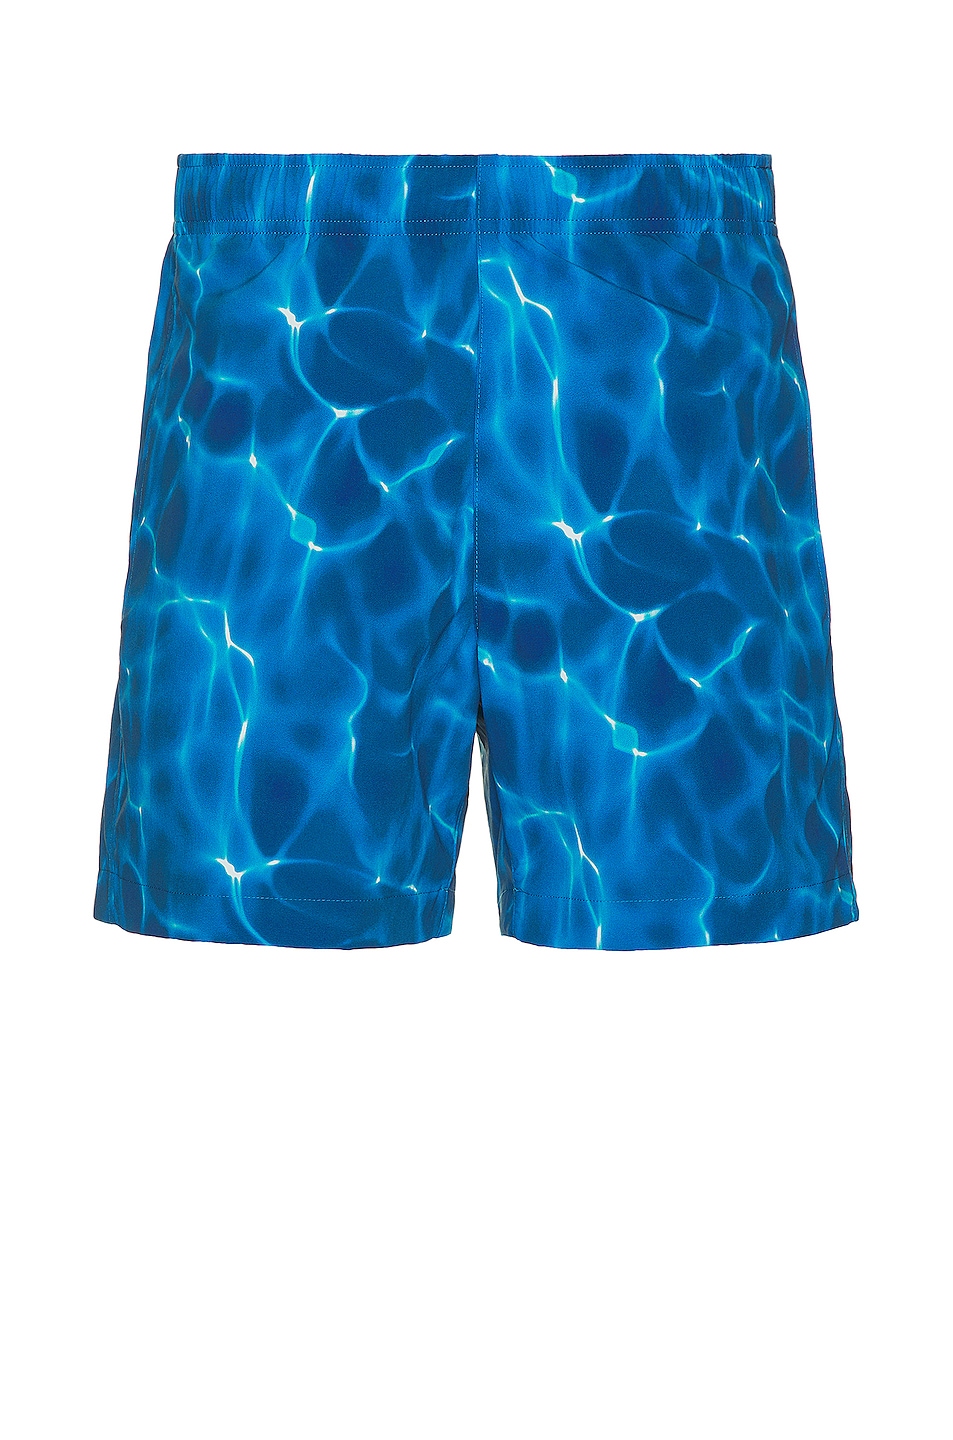 Image 1 of Theory Jace Swim Shorts in Sail Blue Multi